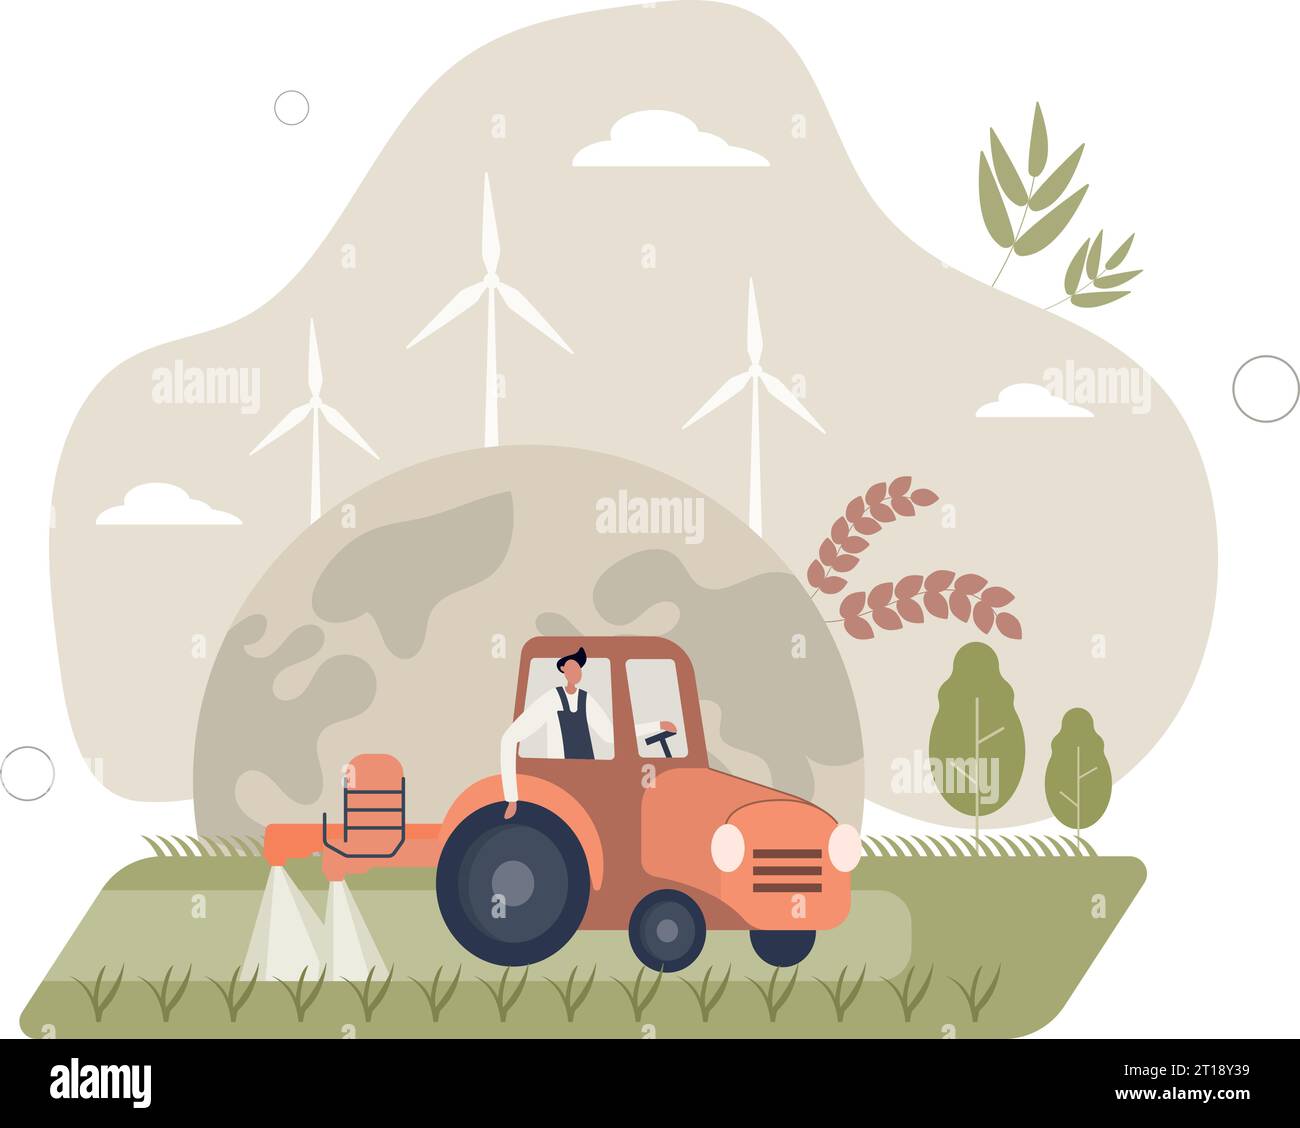 Green revolution and agriculture productivity increase .Grain crops production boost with irrigation, pesticides and fertilizers as effective method. Stock Vector